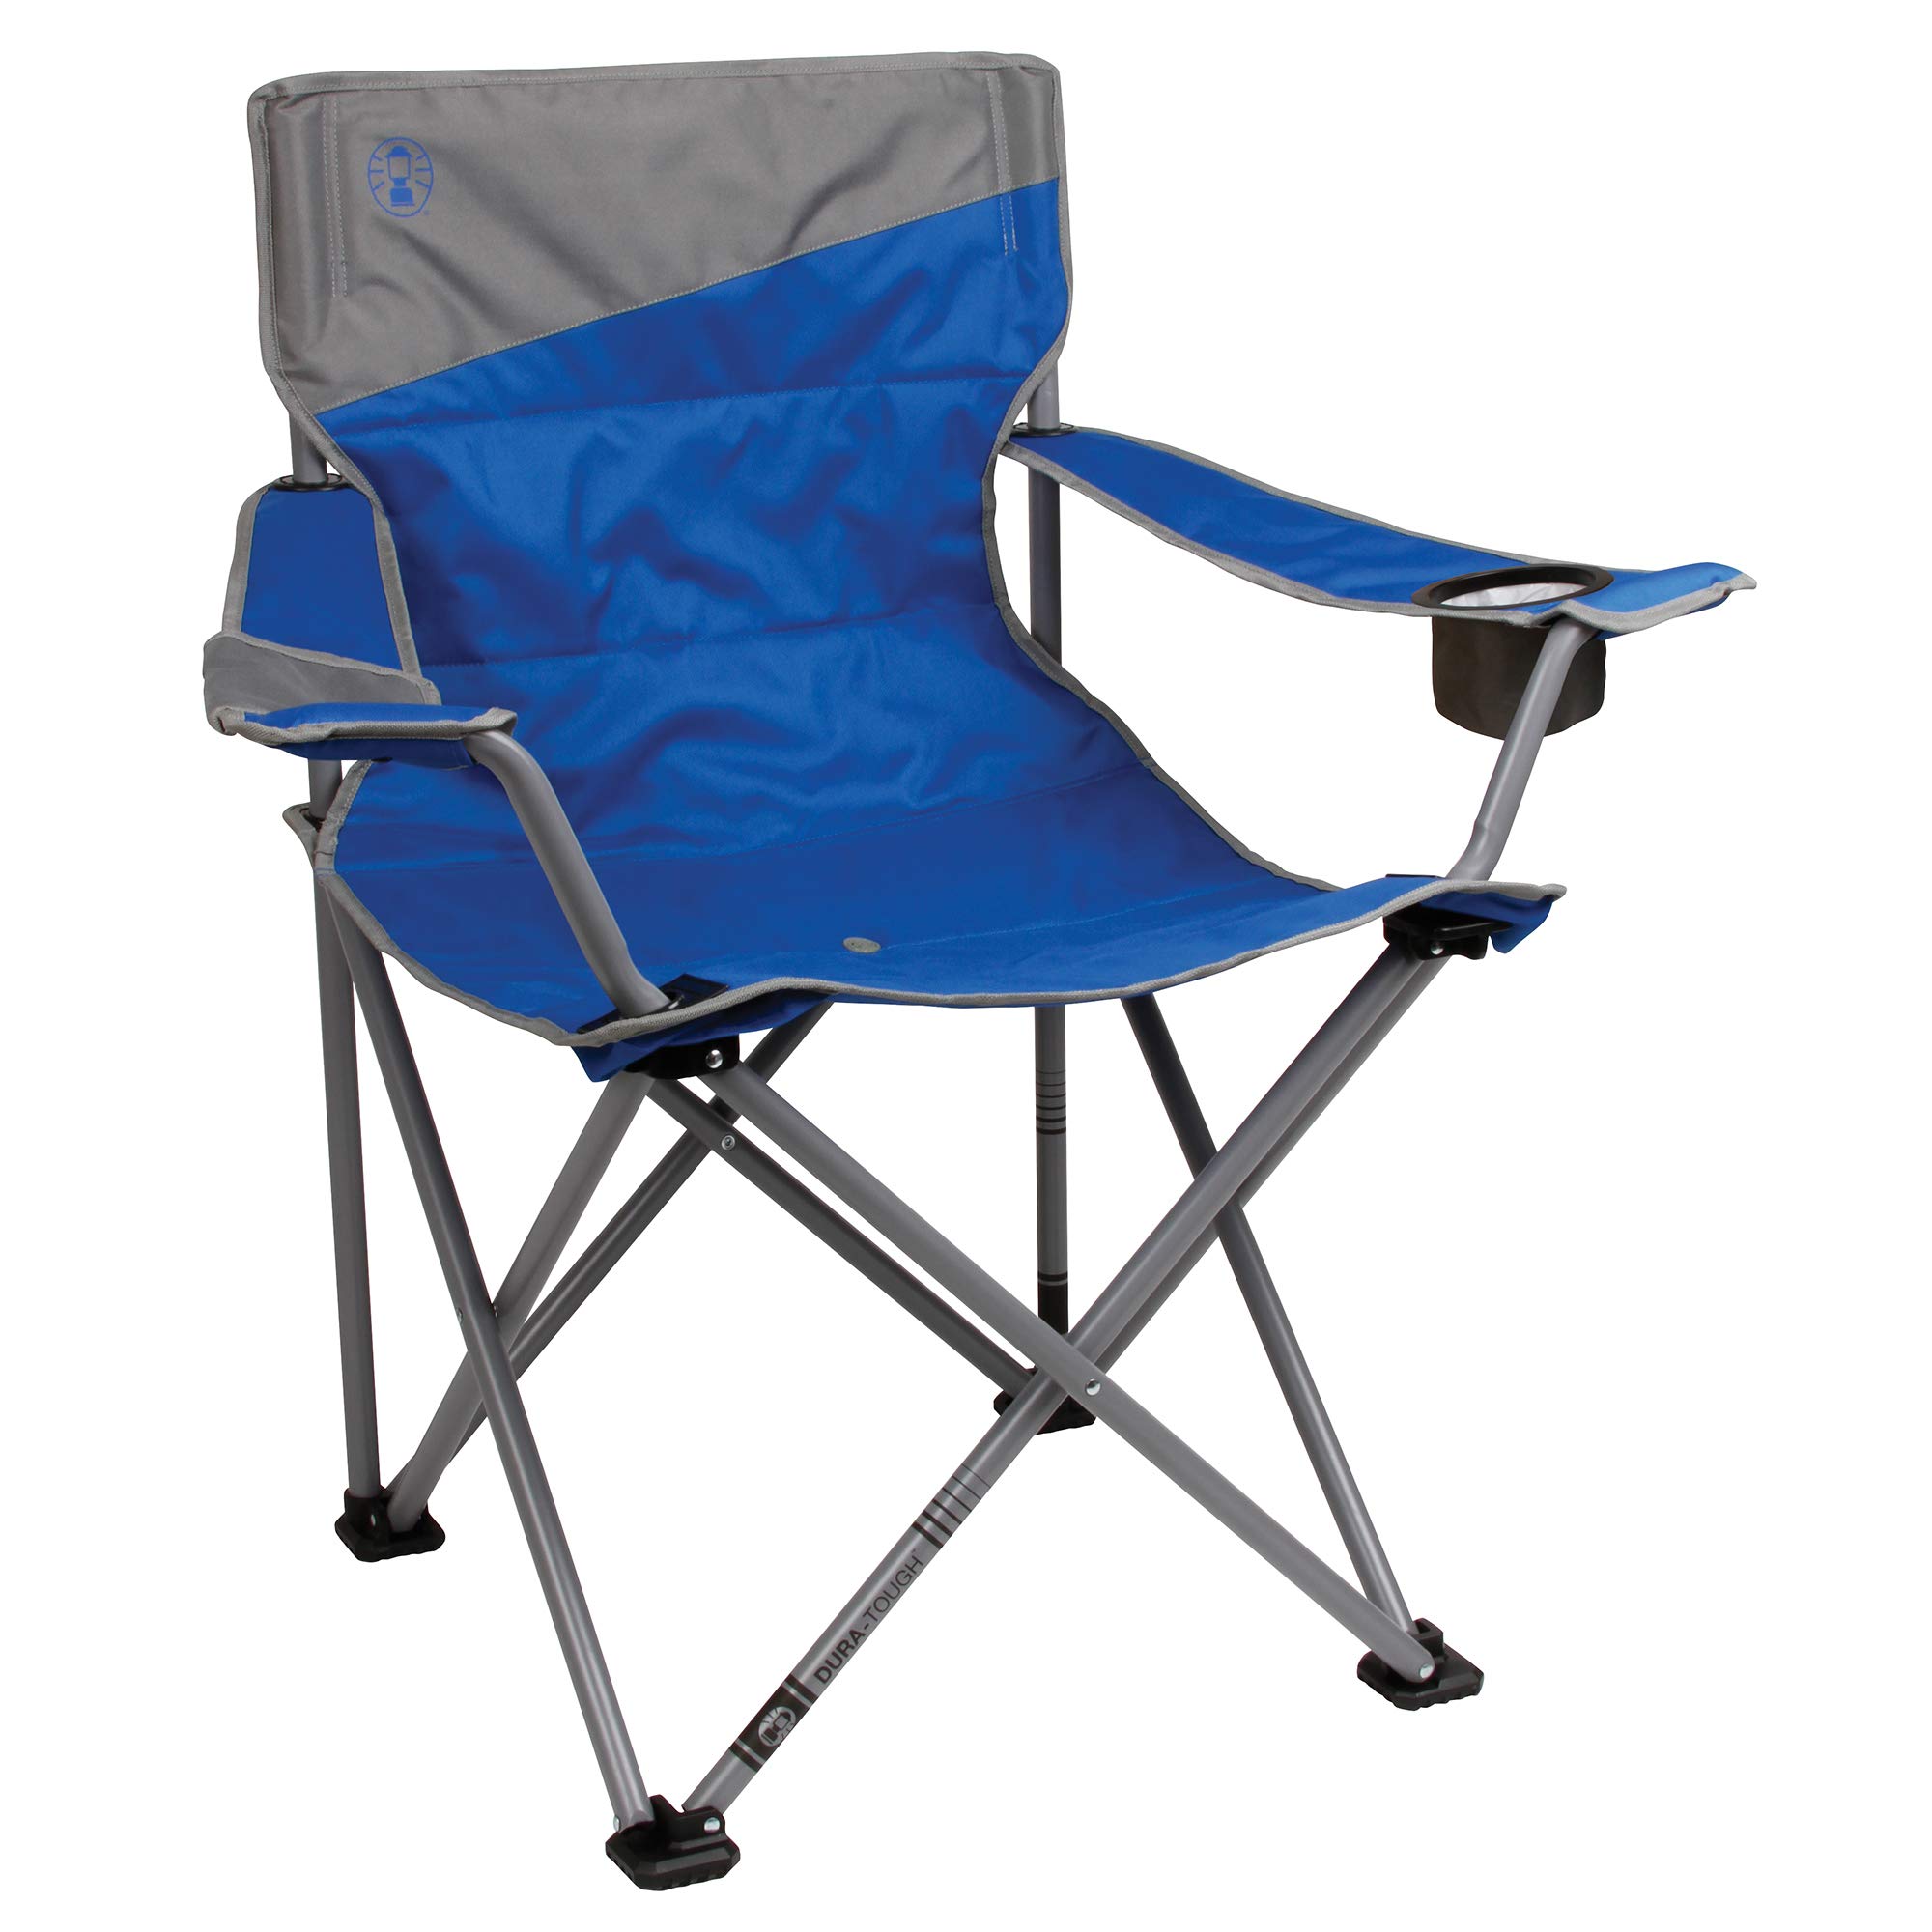 <a href="https://www.amazon.com/dp/B01C361AZW?%3Fth=1&psc=1&tag=thecampfire0d-20">Coleman Big and Tall Camp Chair</a>